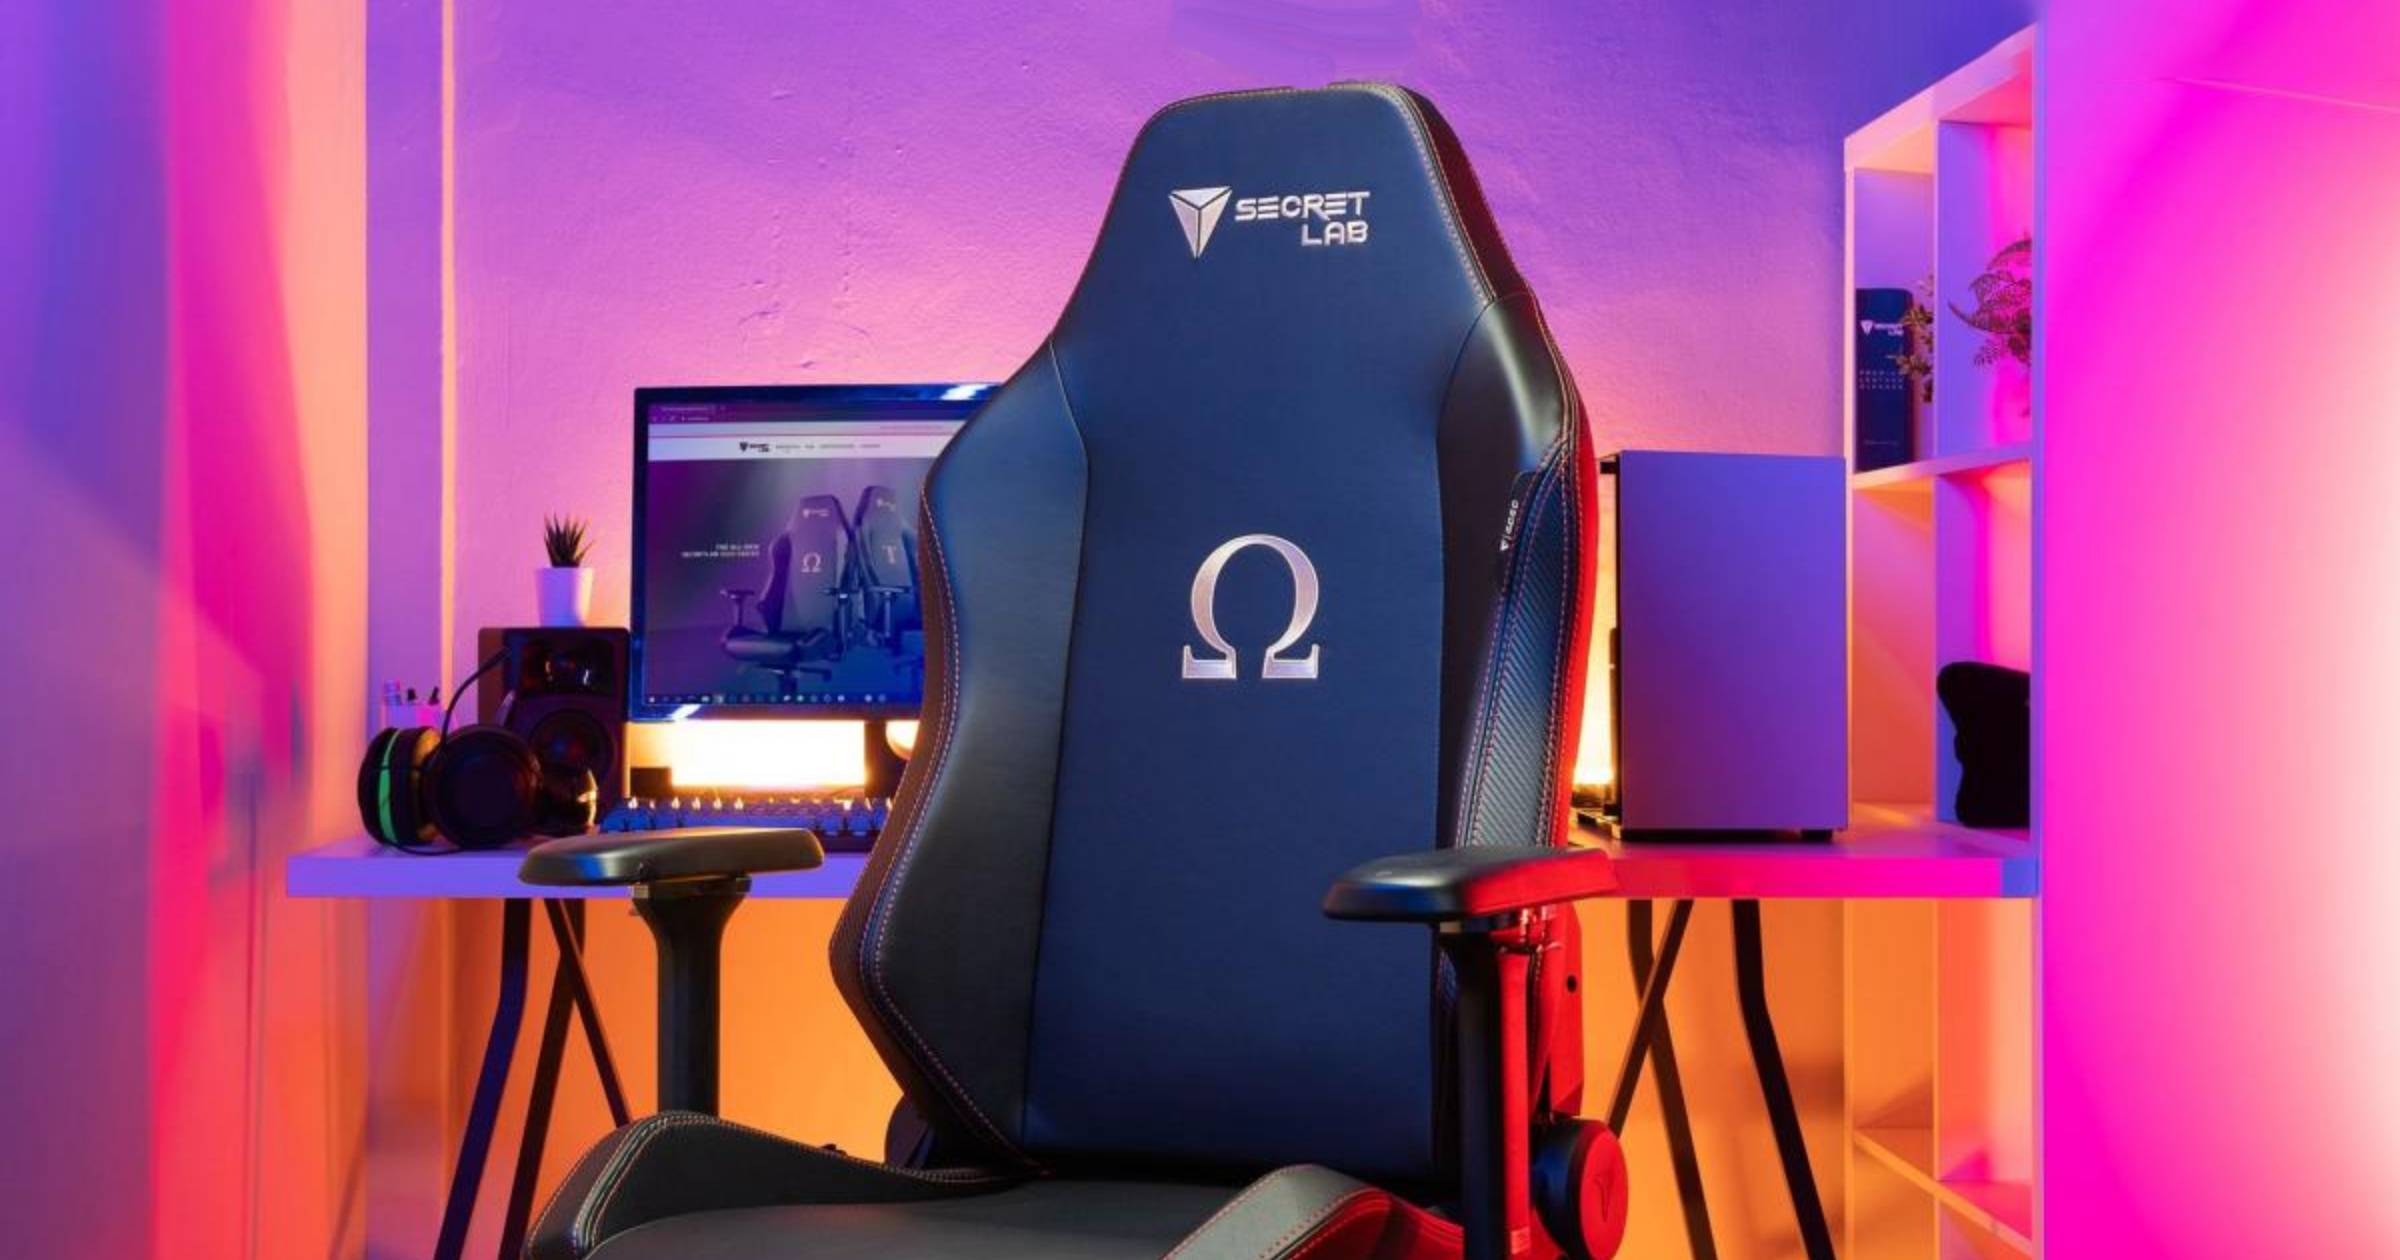 Secretlab 2020 Series gaming chair review: Small refinements equal